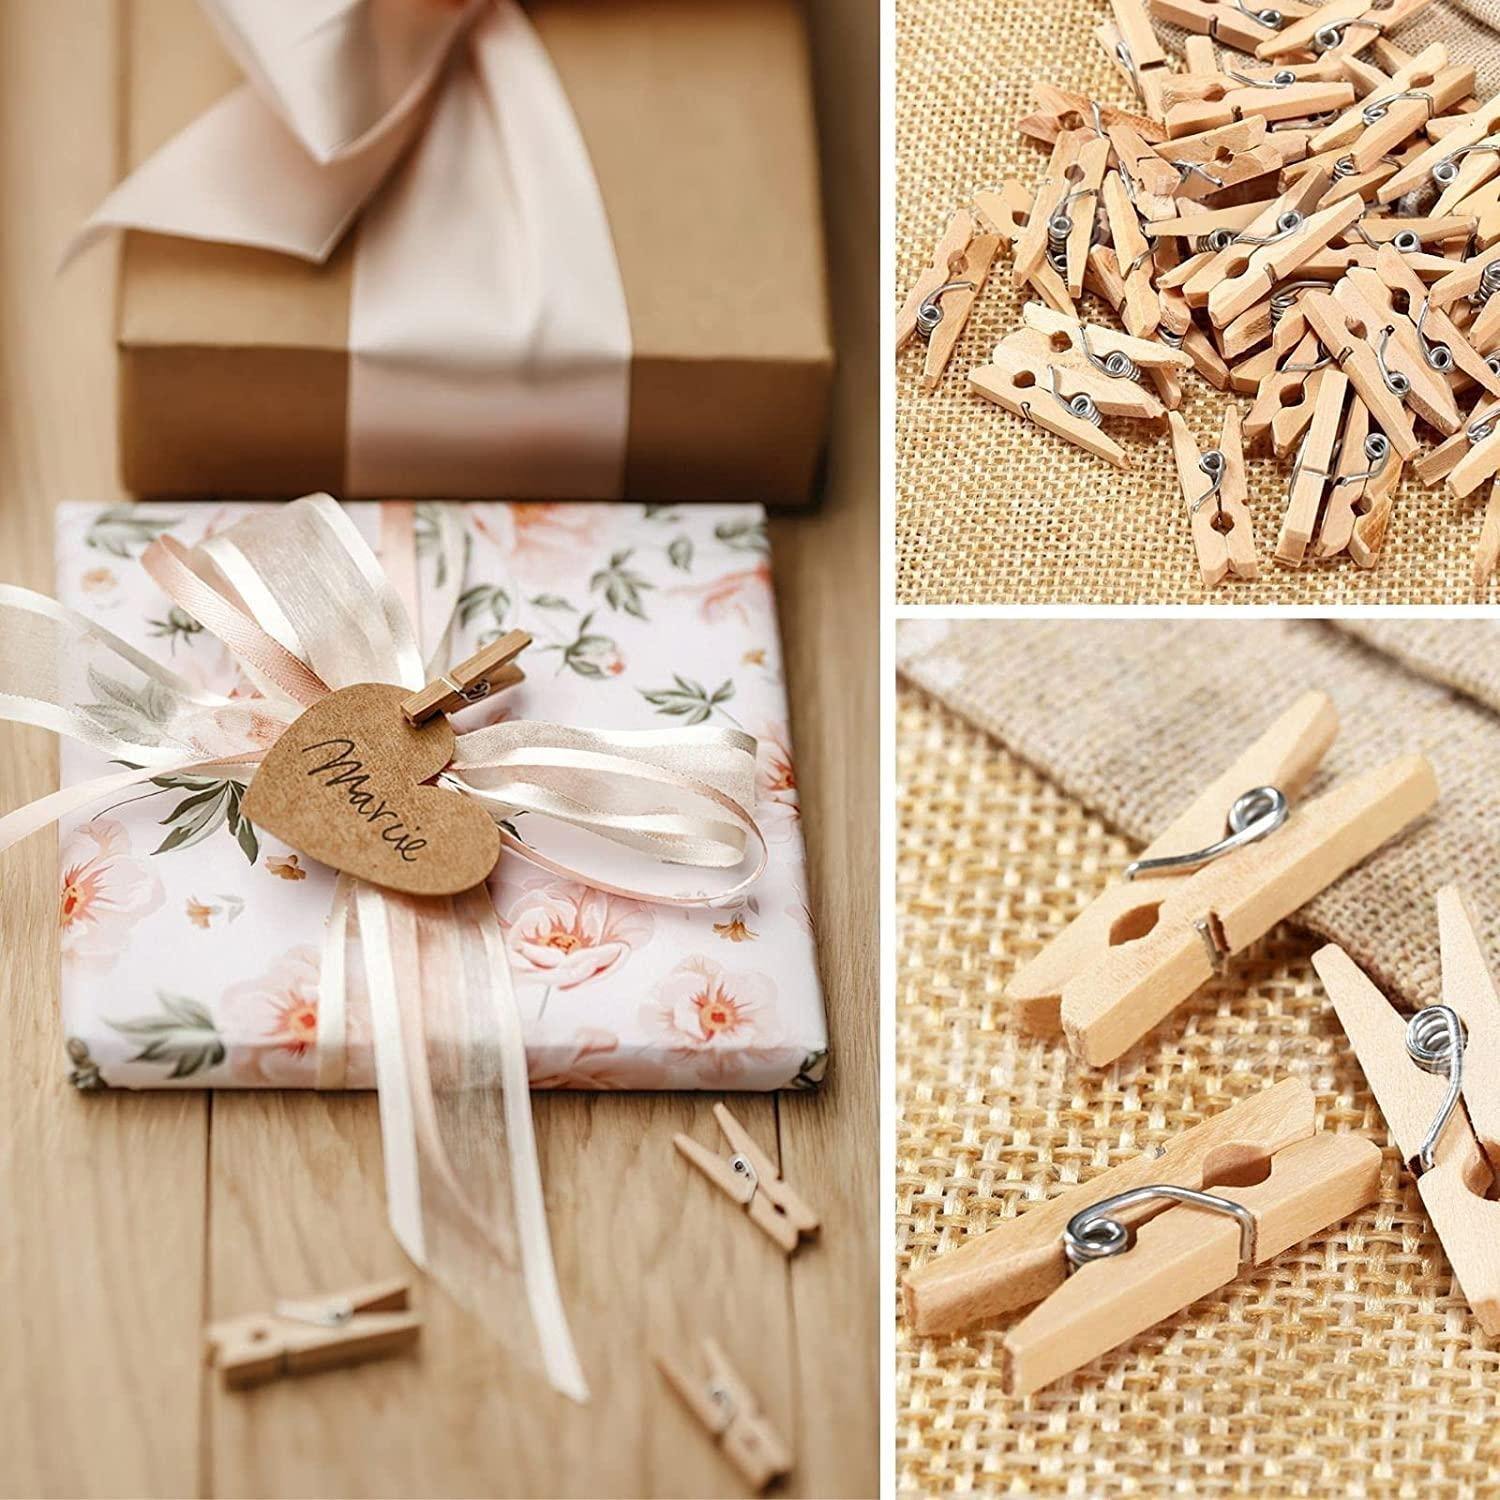 150 PCS Mini Natural Wooden Clothespins for Photo Small Picture Clips for  Crafts Decorative Wood Clips for Wall Hanging Picture Home Party Decoration  Miniature Decorative Clothespins 